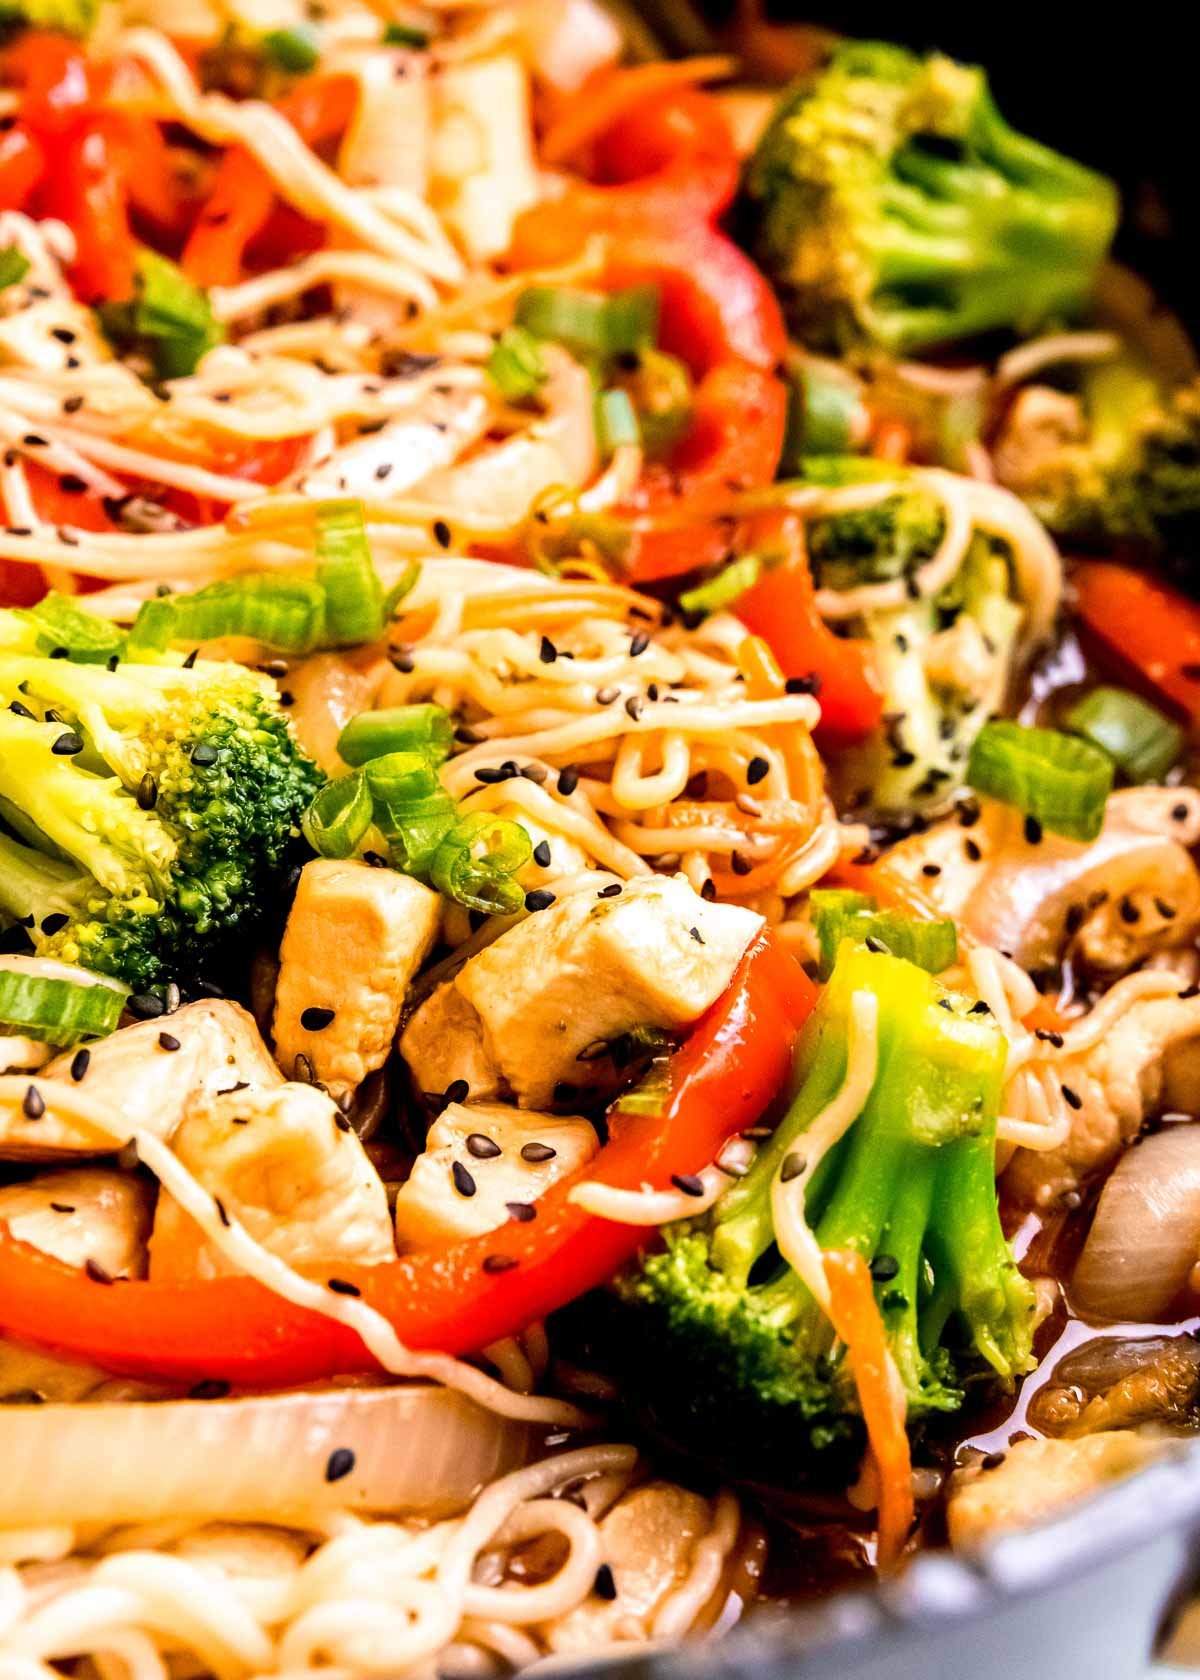 juicy chicken, tender shirataki noodles, red bell peppers, broccoli florets covered in stir fry sauce in a skillet